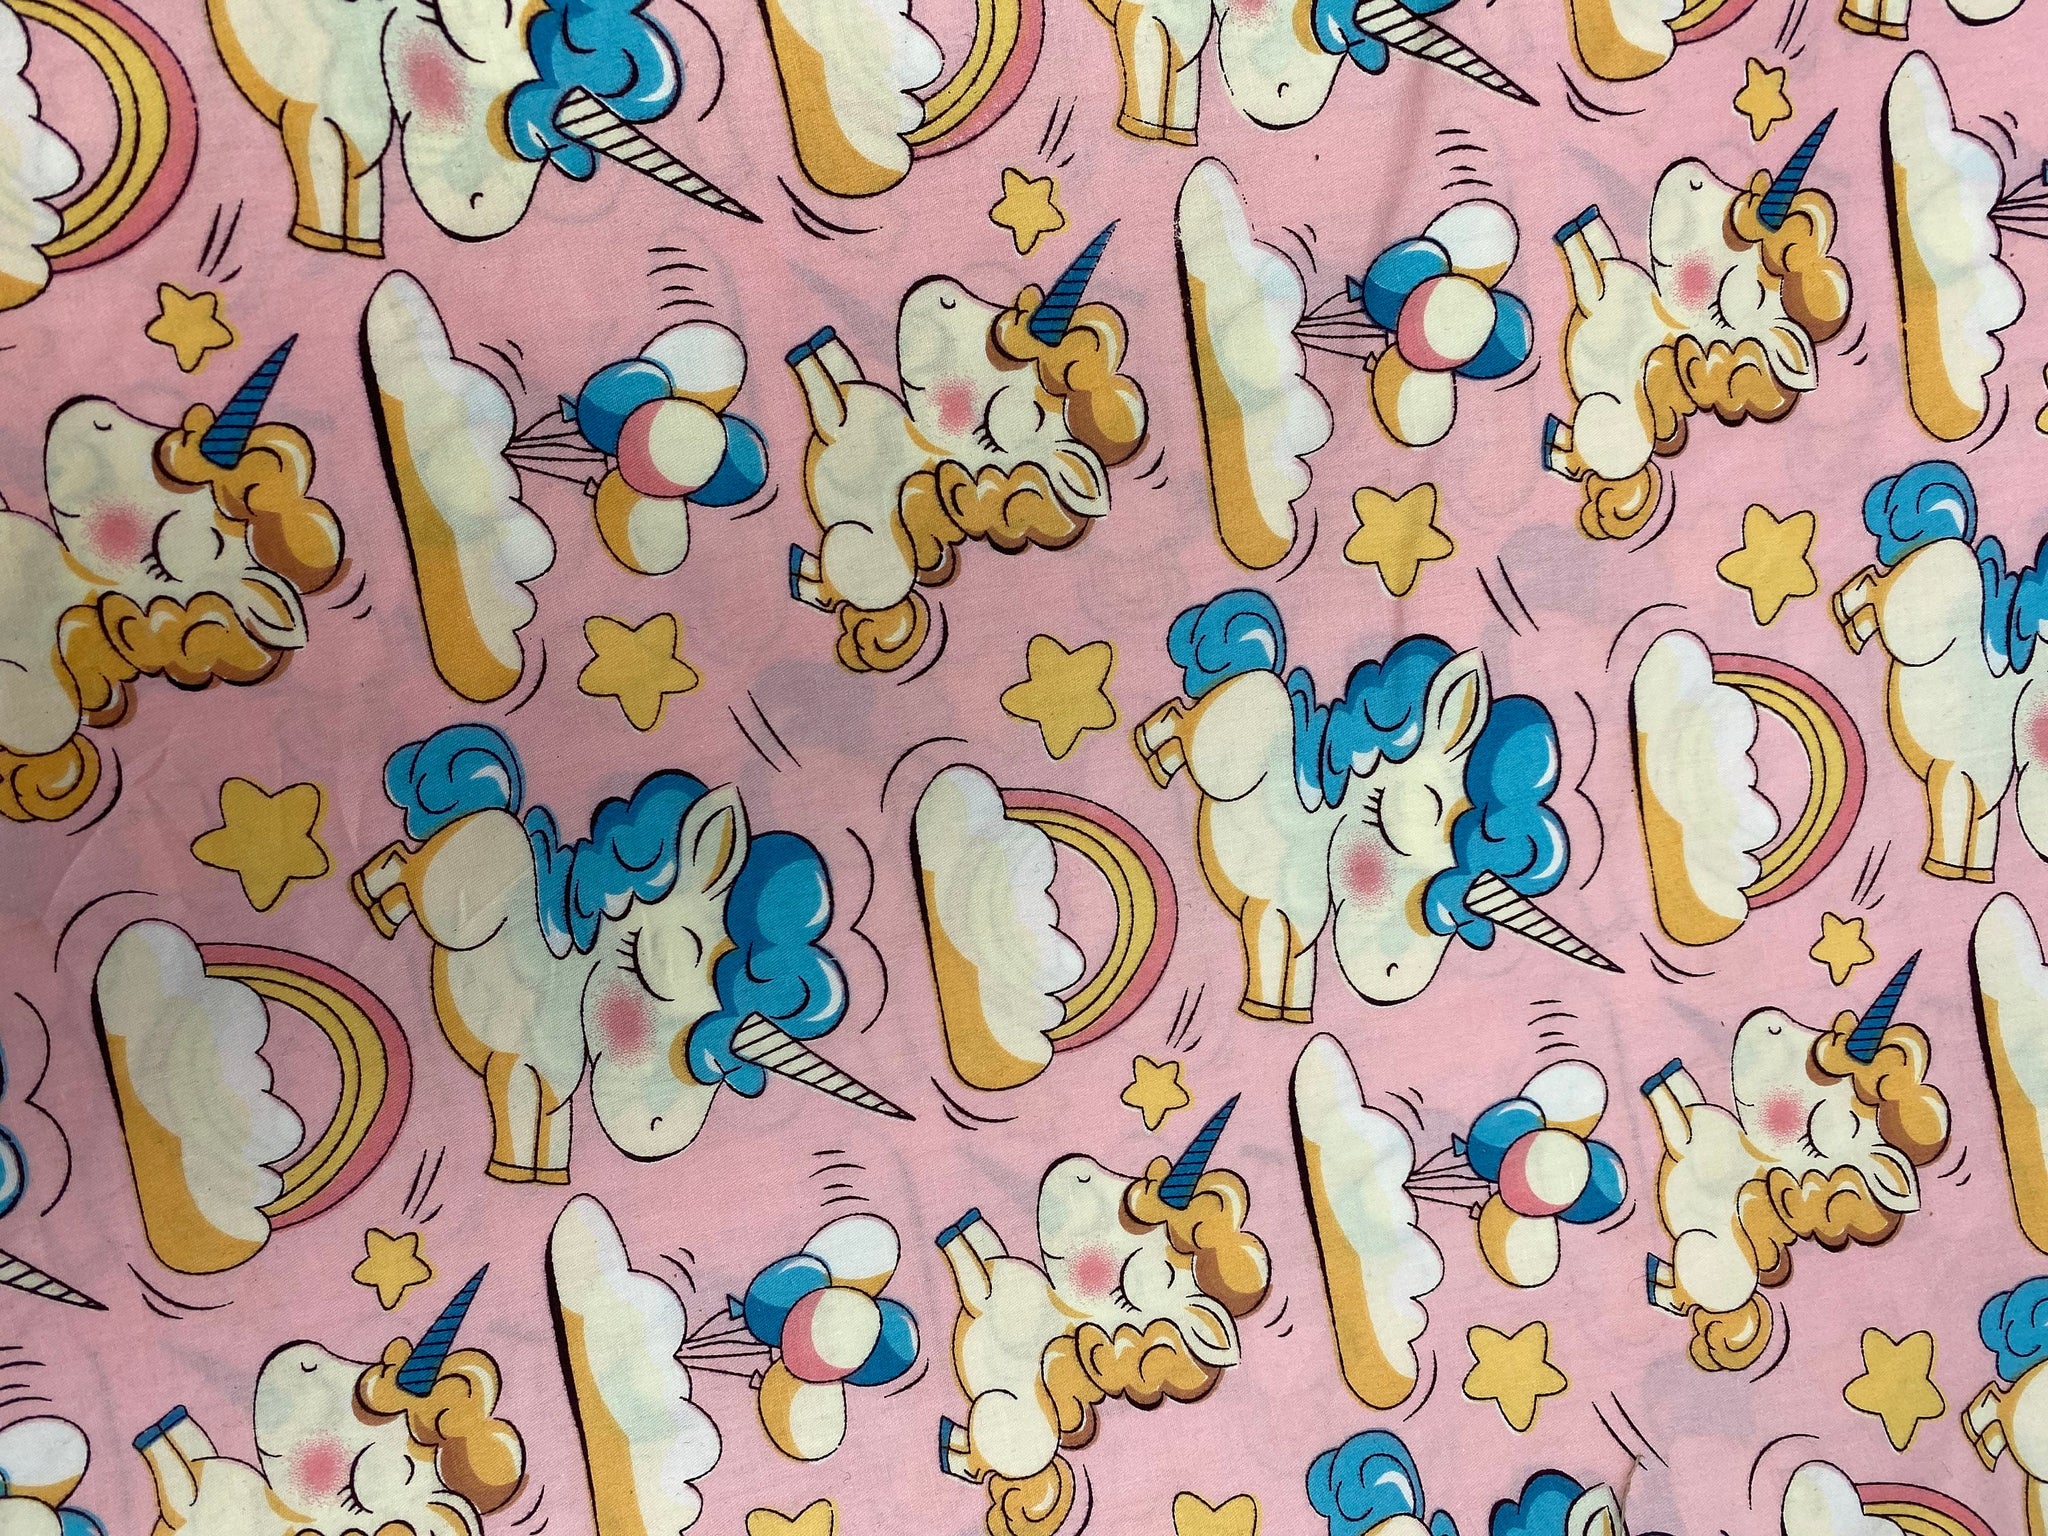 NEW,"Unicorn Balloons", 100% Ribbed Cotton Fabric, Boutique Fabric,Custom Made Kids Fabric for Masks, Accessories,Bedding & More, 1 Yard